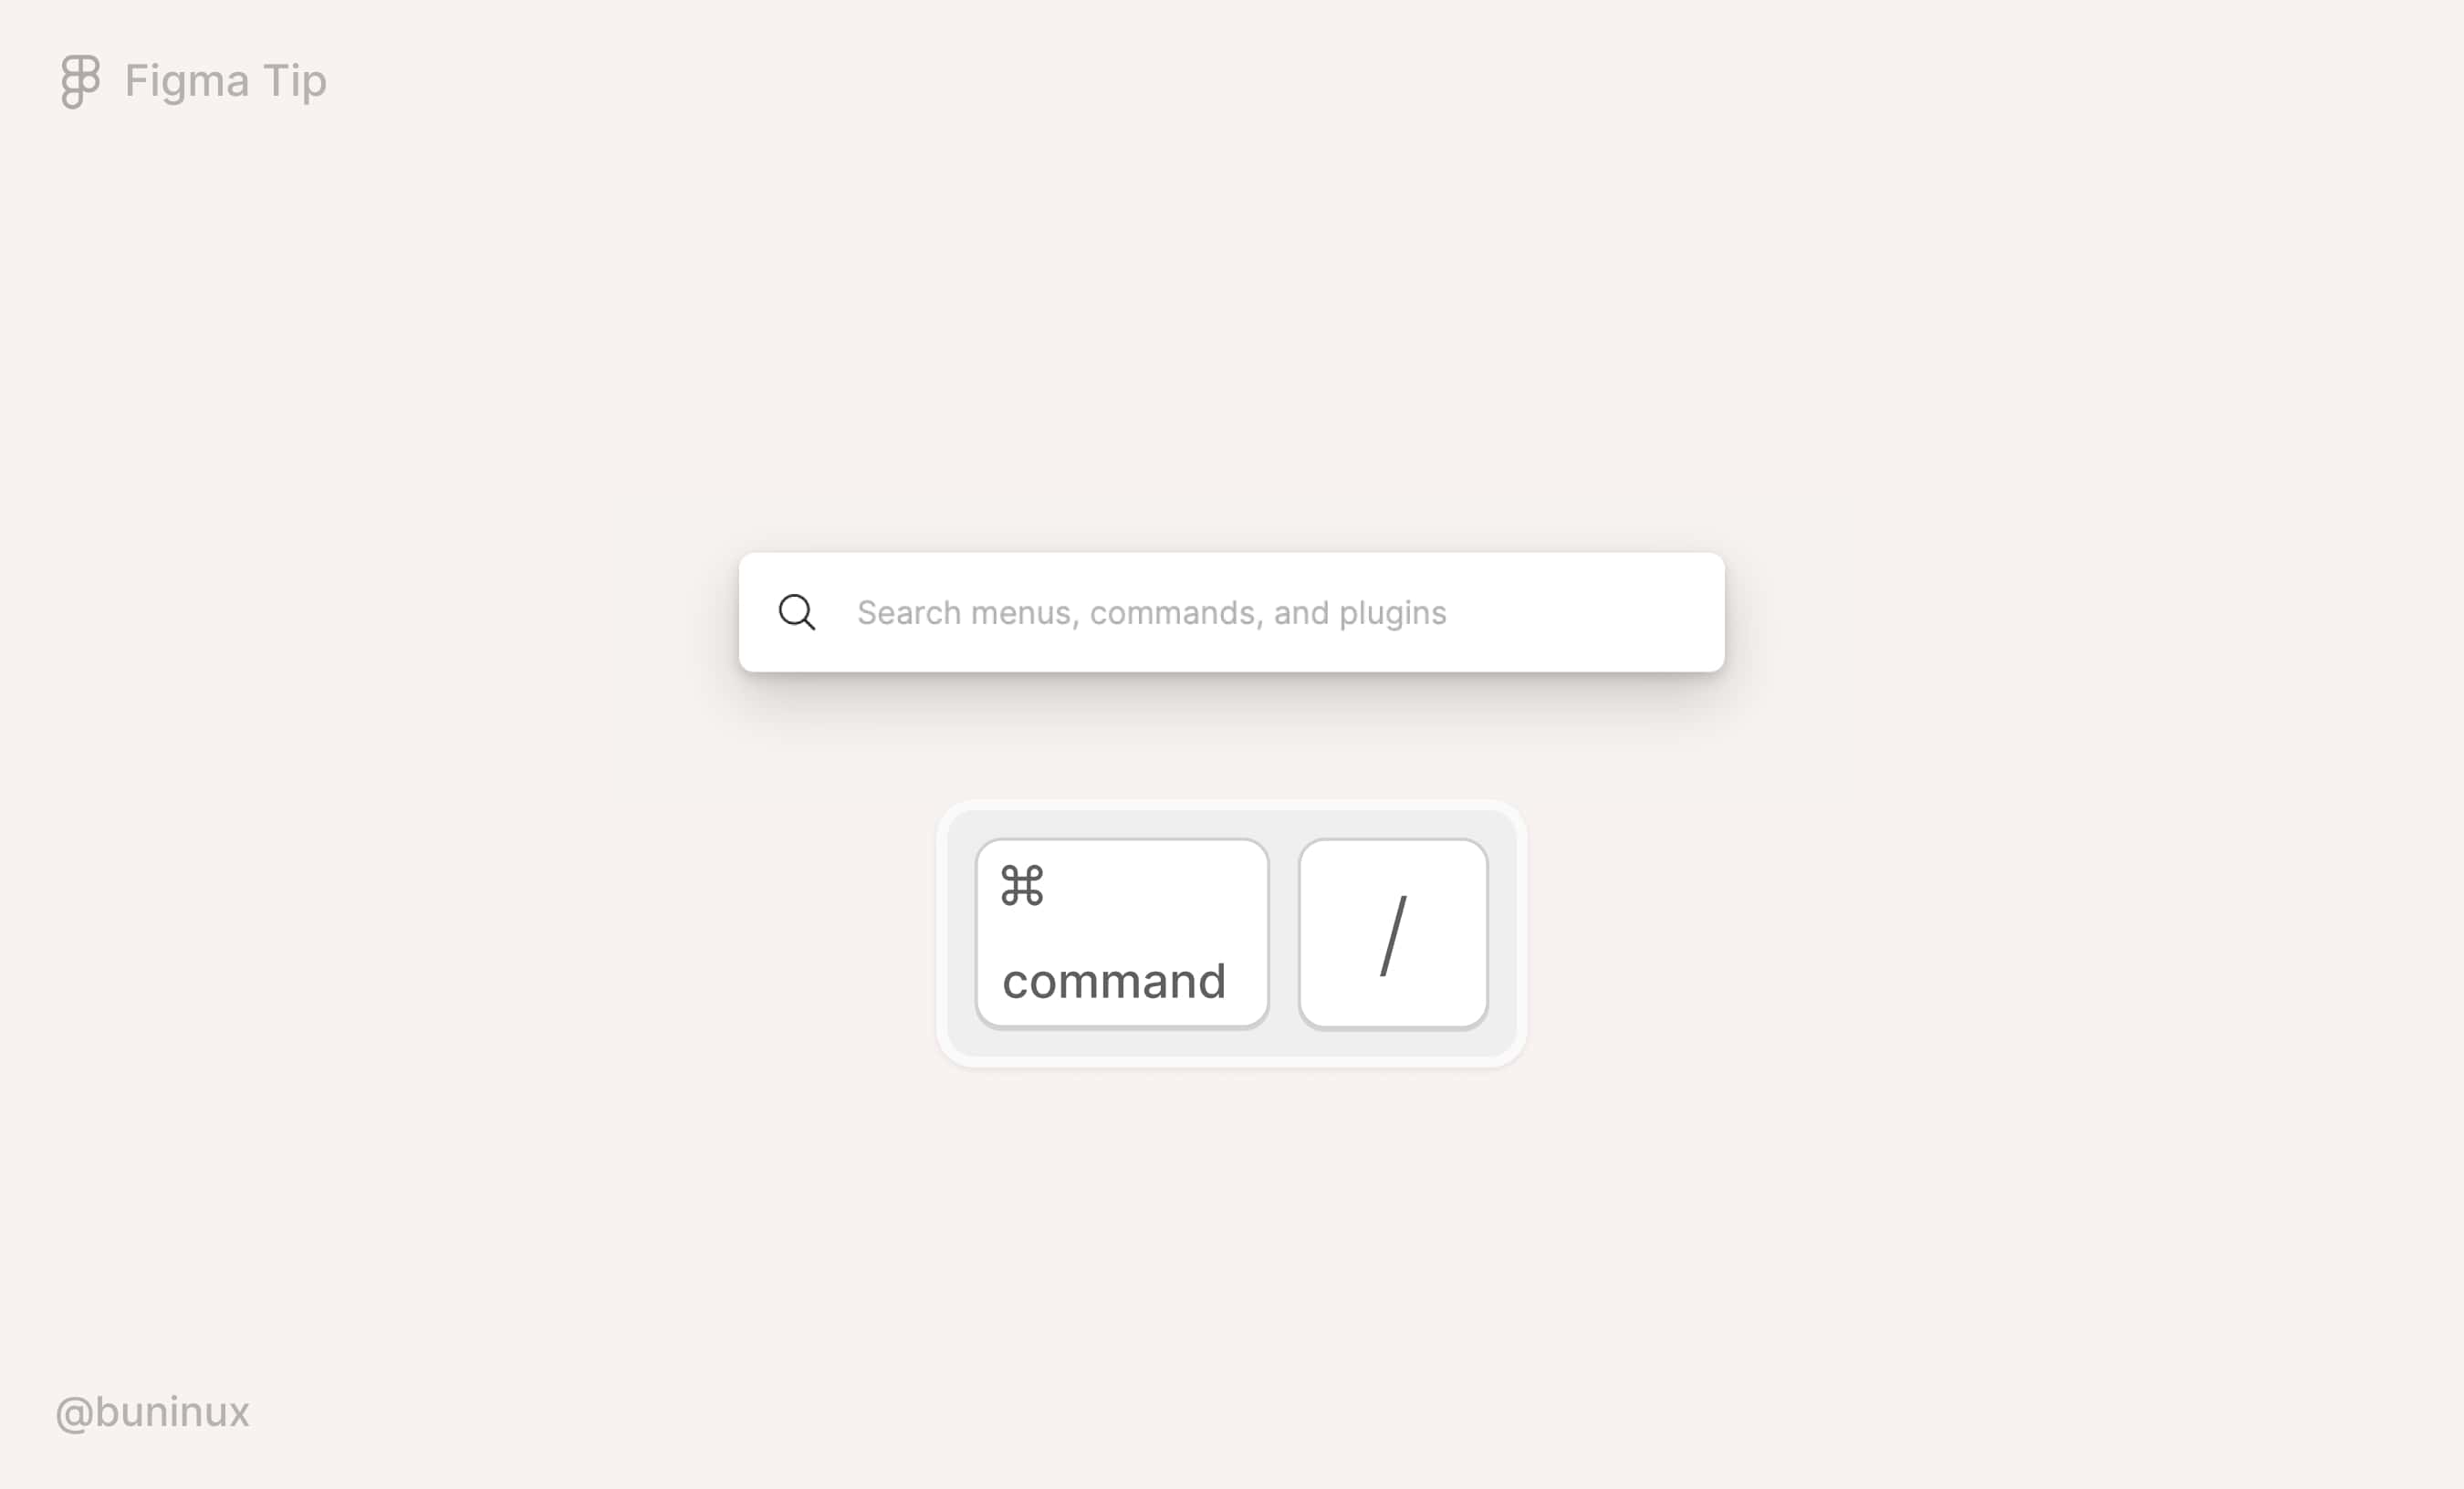 Use Quick actions commands menu in Figma